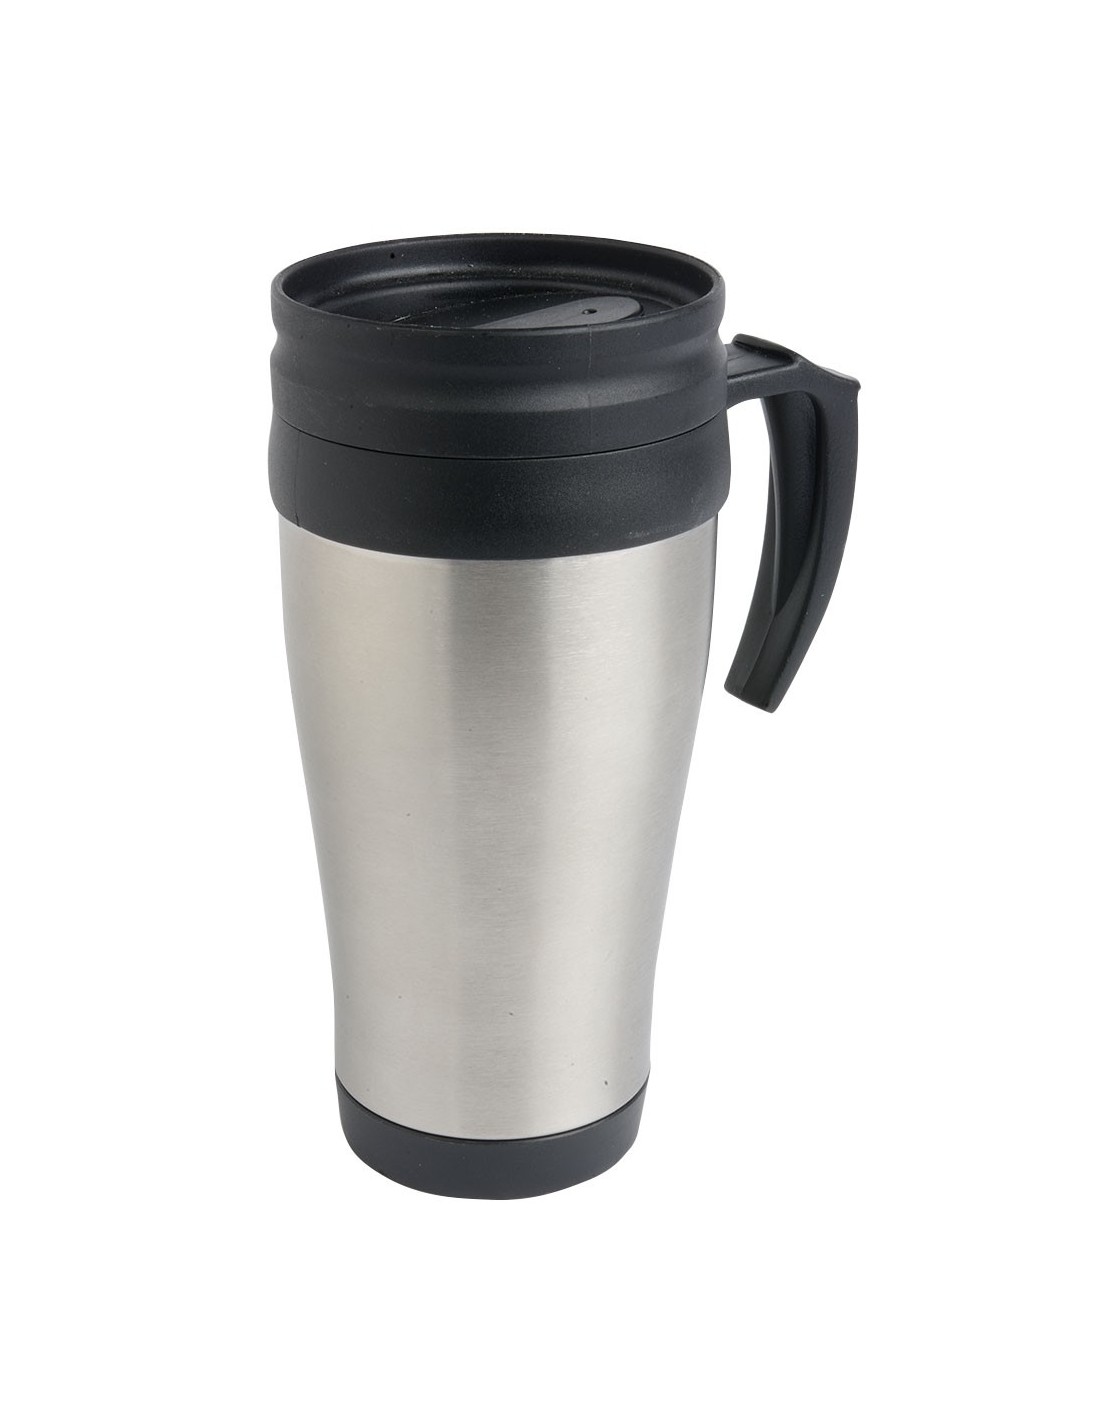 https://www.qwalis.com/1528-thickbox_default/thermos-cup.jpg